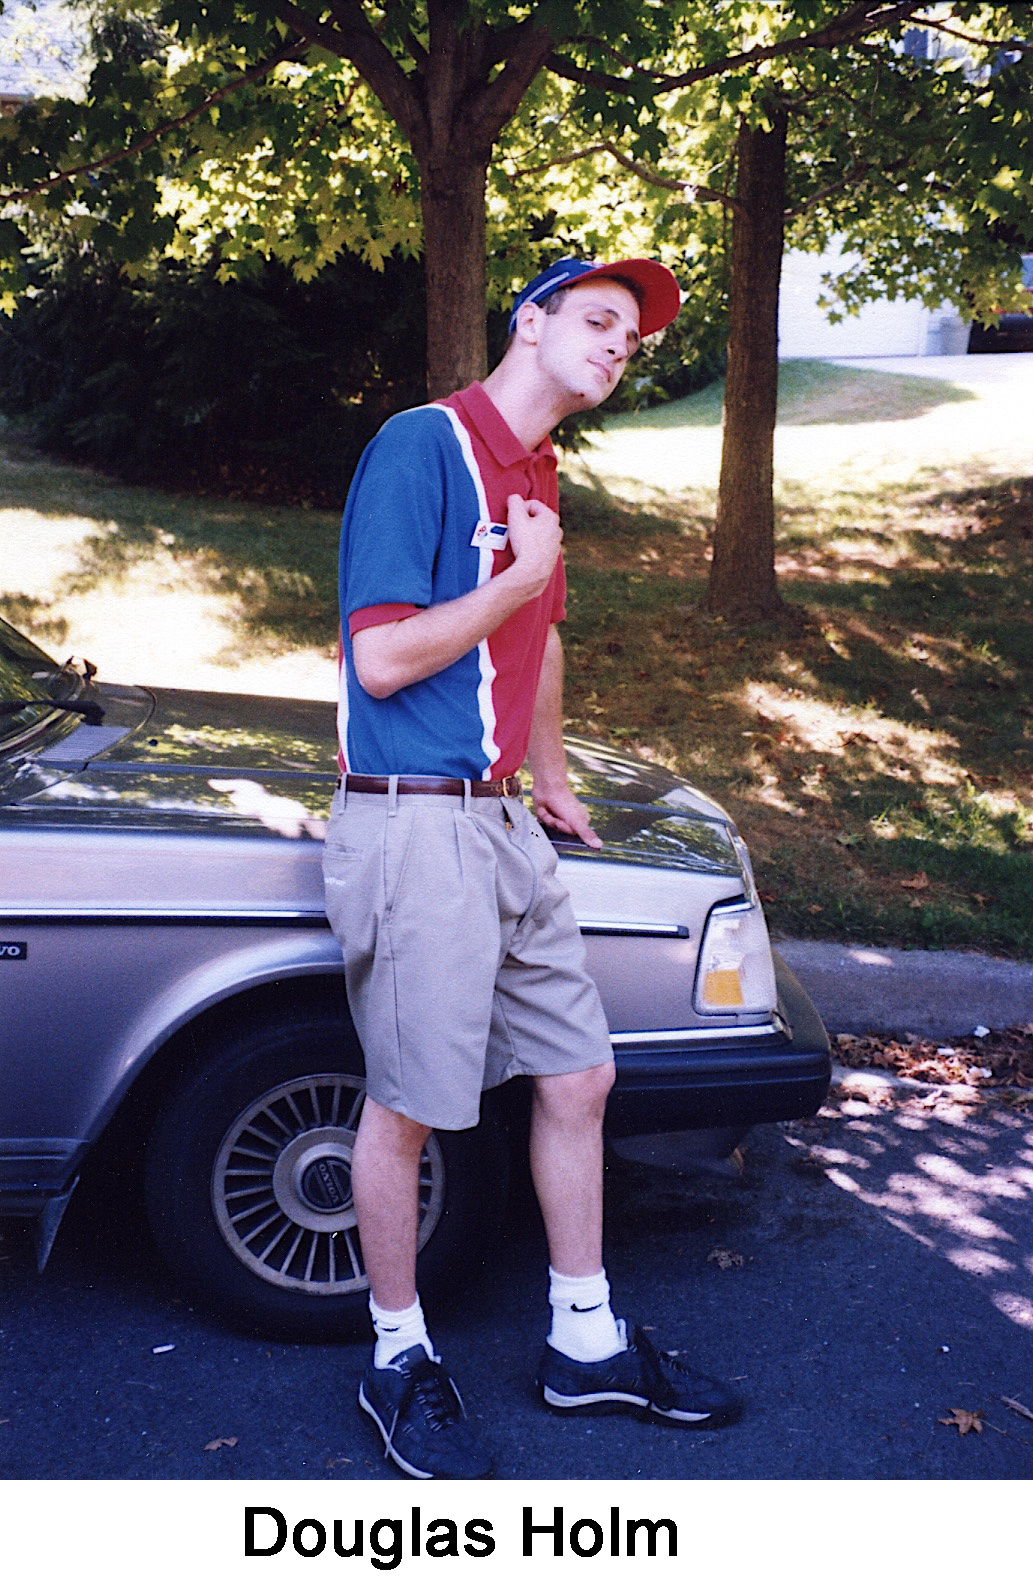 Doug is standing by the hood of the car, and wearing a red and blue shirt and hat     for his uniform.